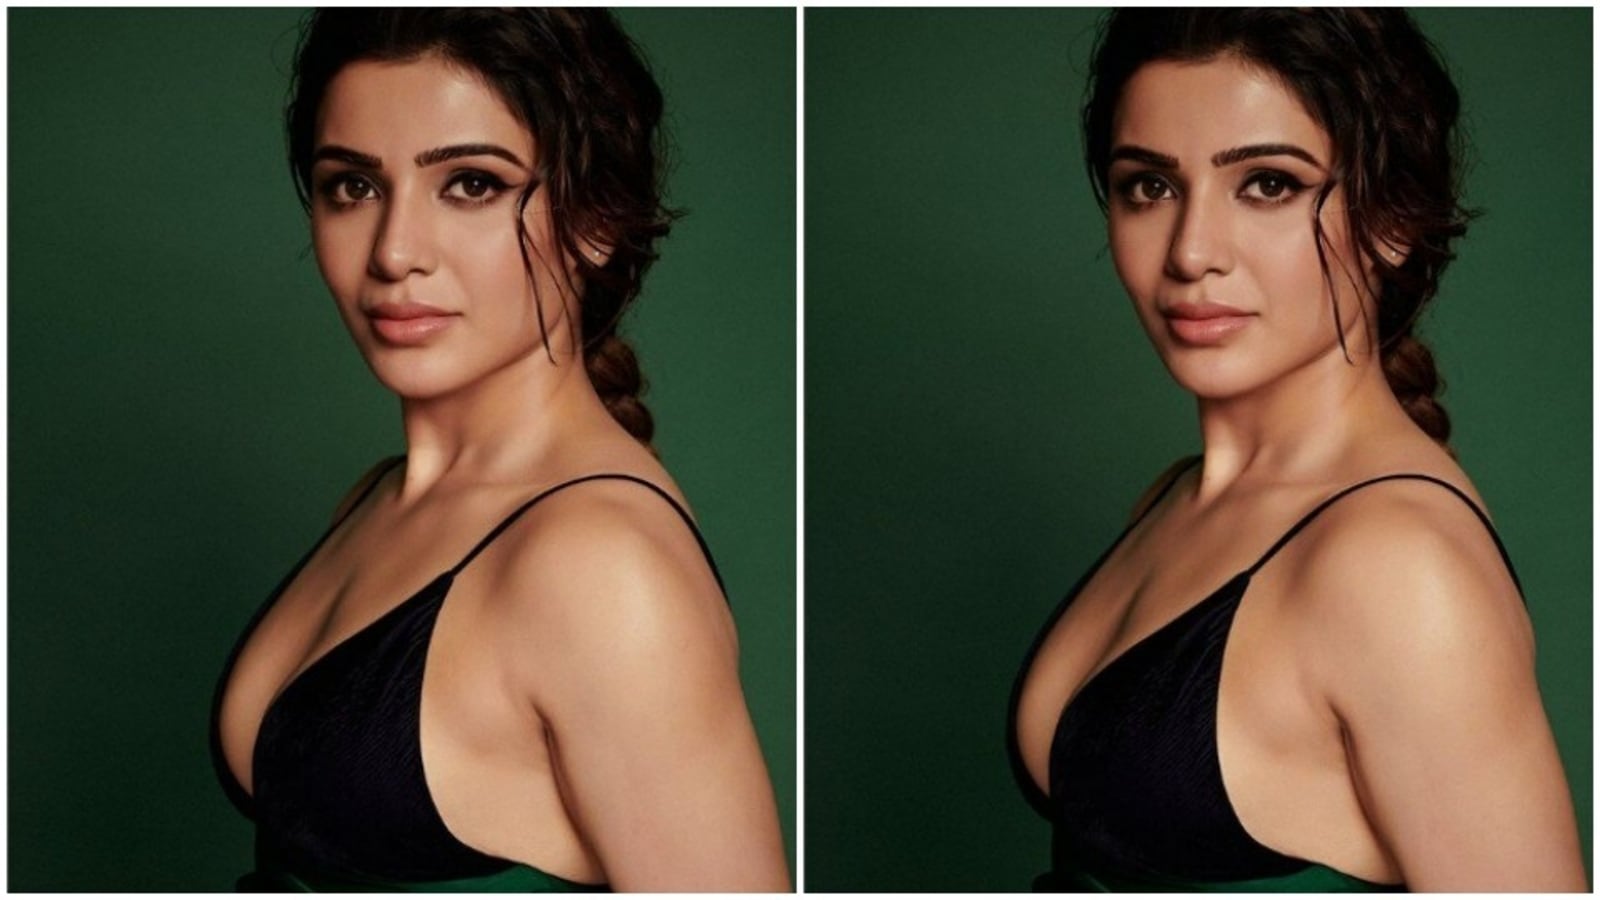 ‘Strong body, stronger mind’: Samantha Ruth Prabhu nails deadlifts with squats